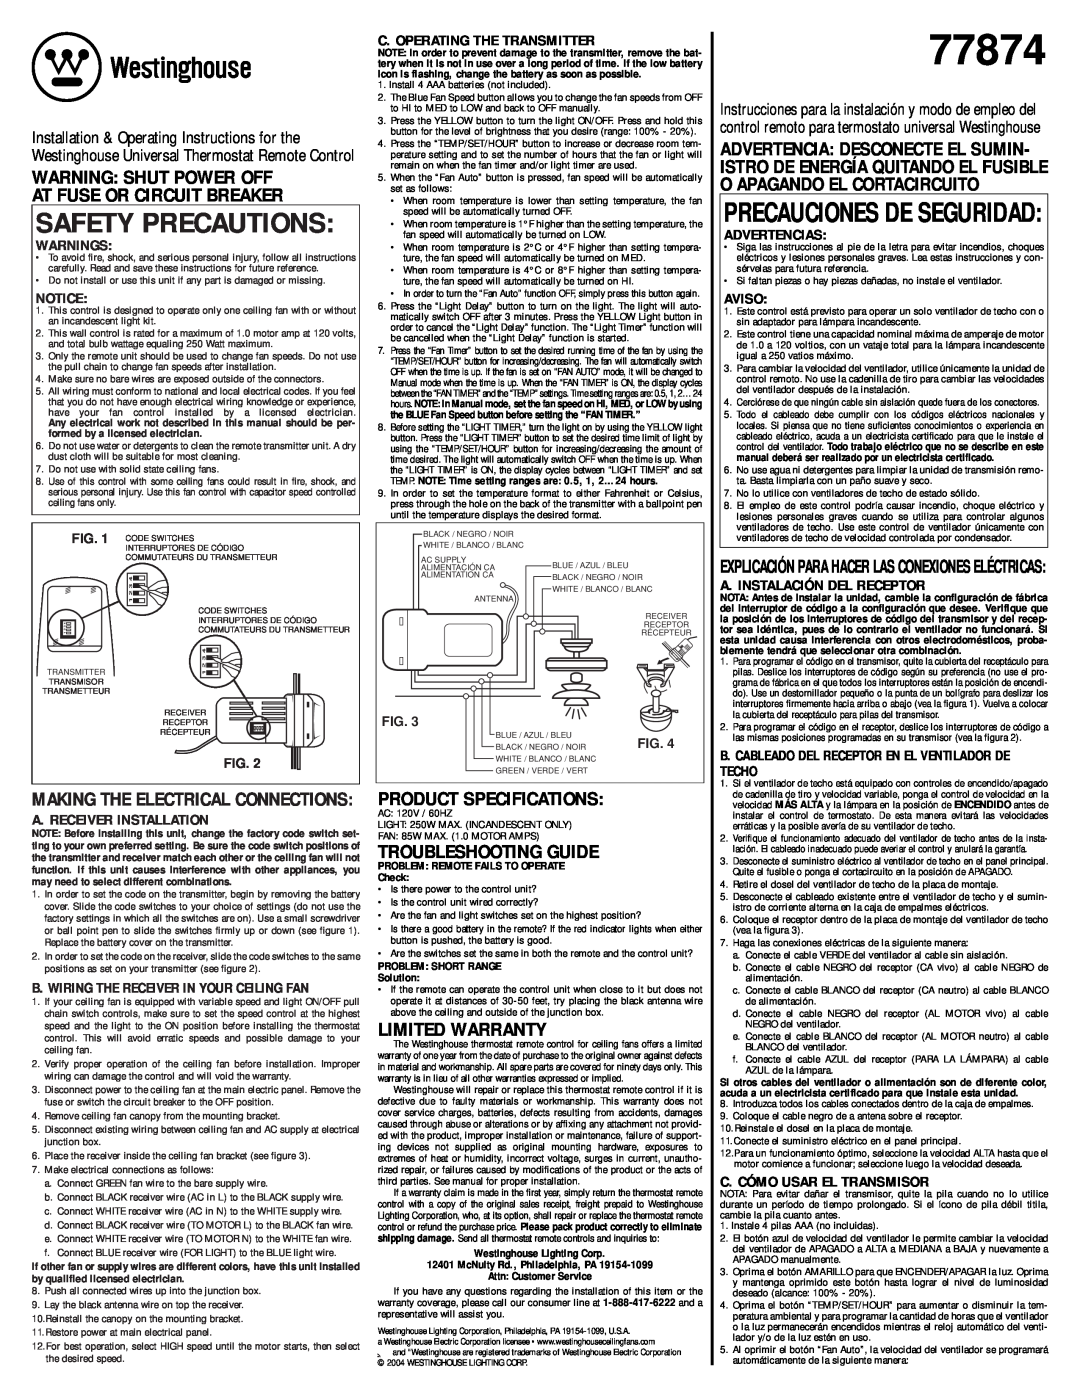 Westinghouse 77874 specifications Warnings, Making The Electrical Connections, A. Receiver Installation, Limited Warranty 